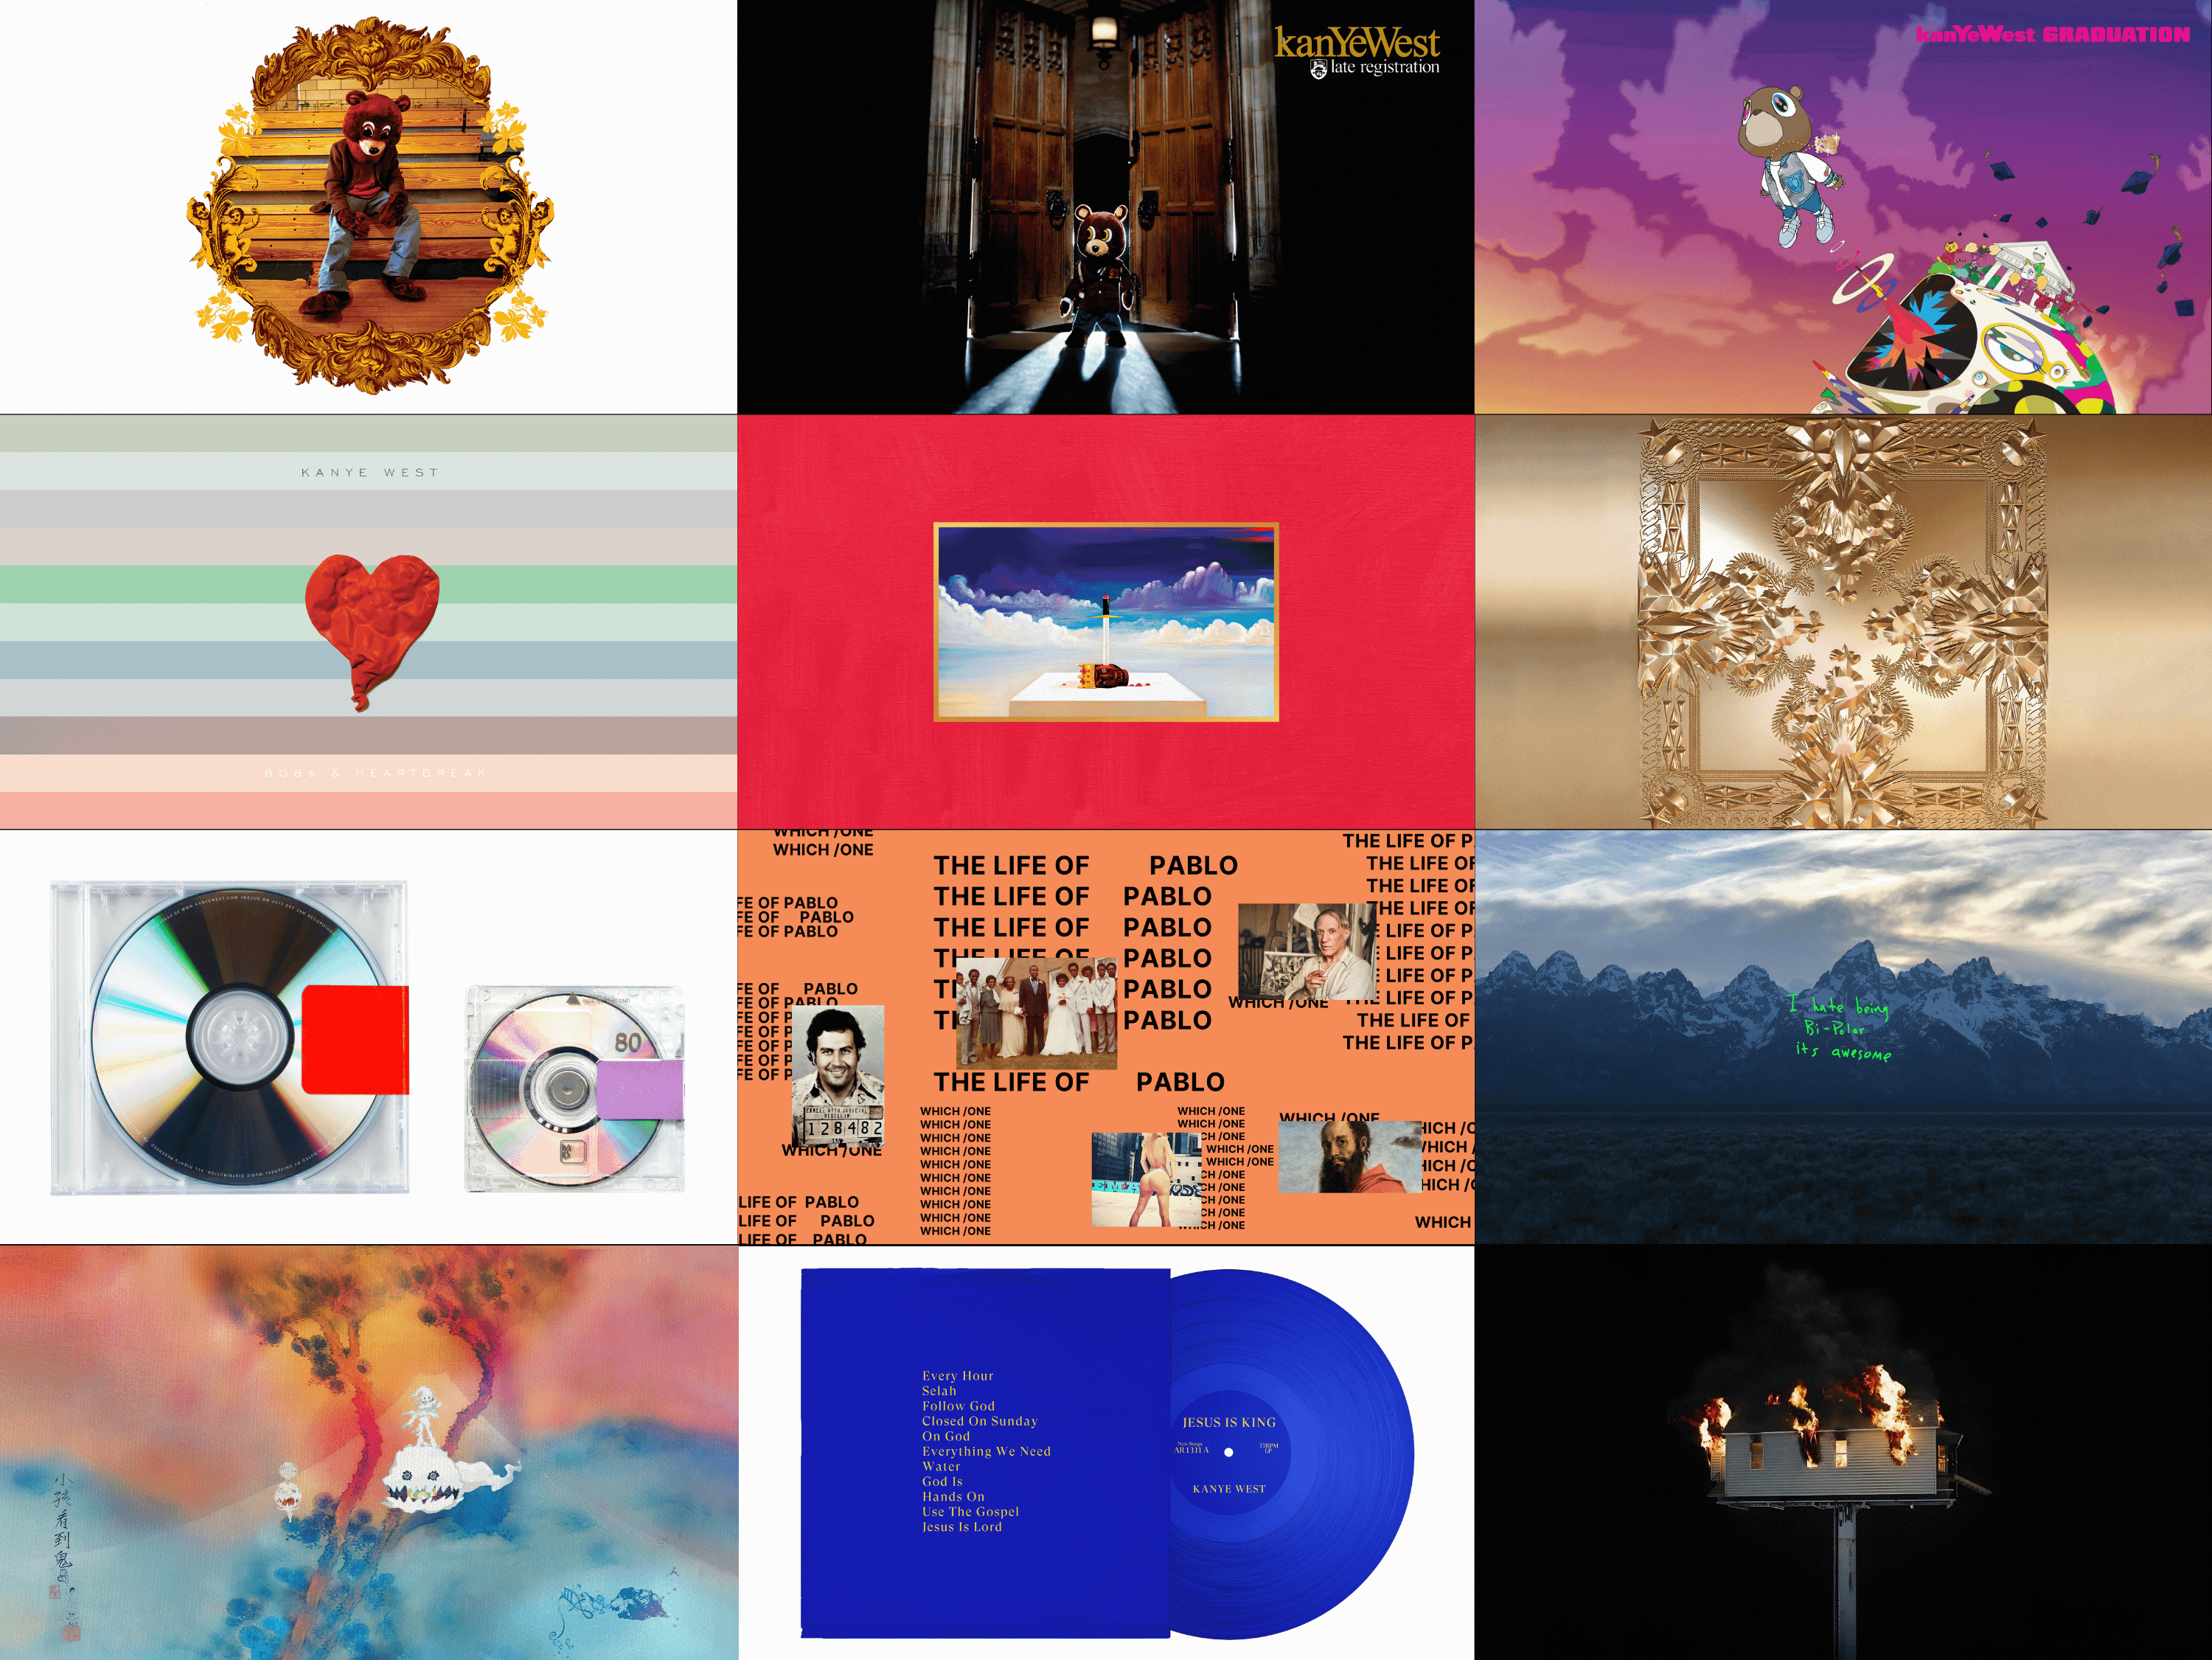 I did the job of turning the whole Kanye West studio discography